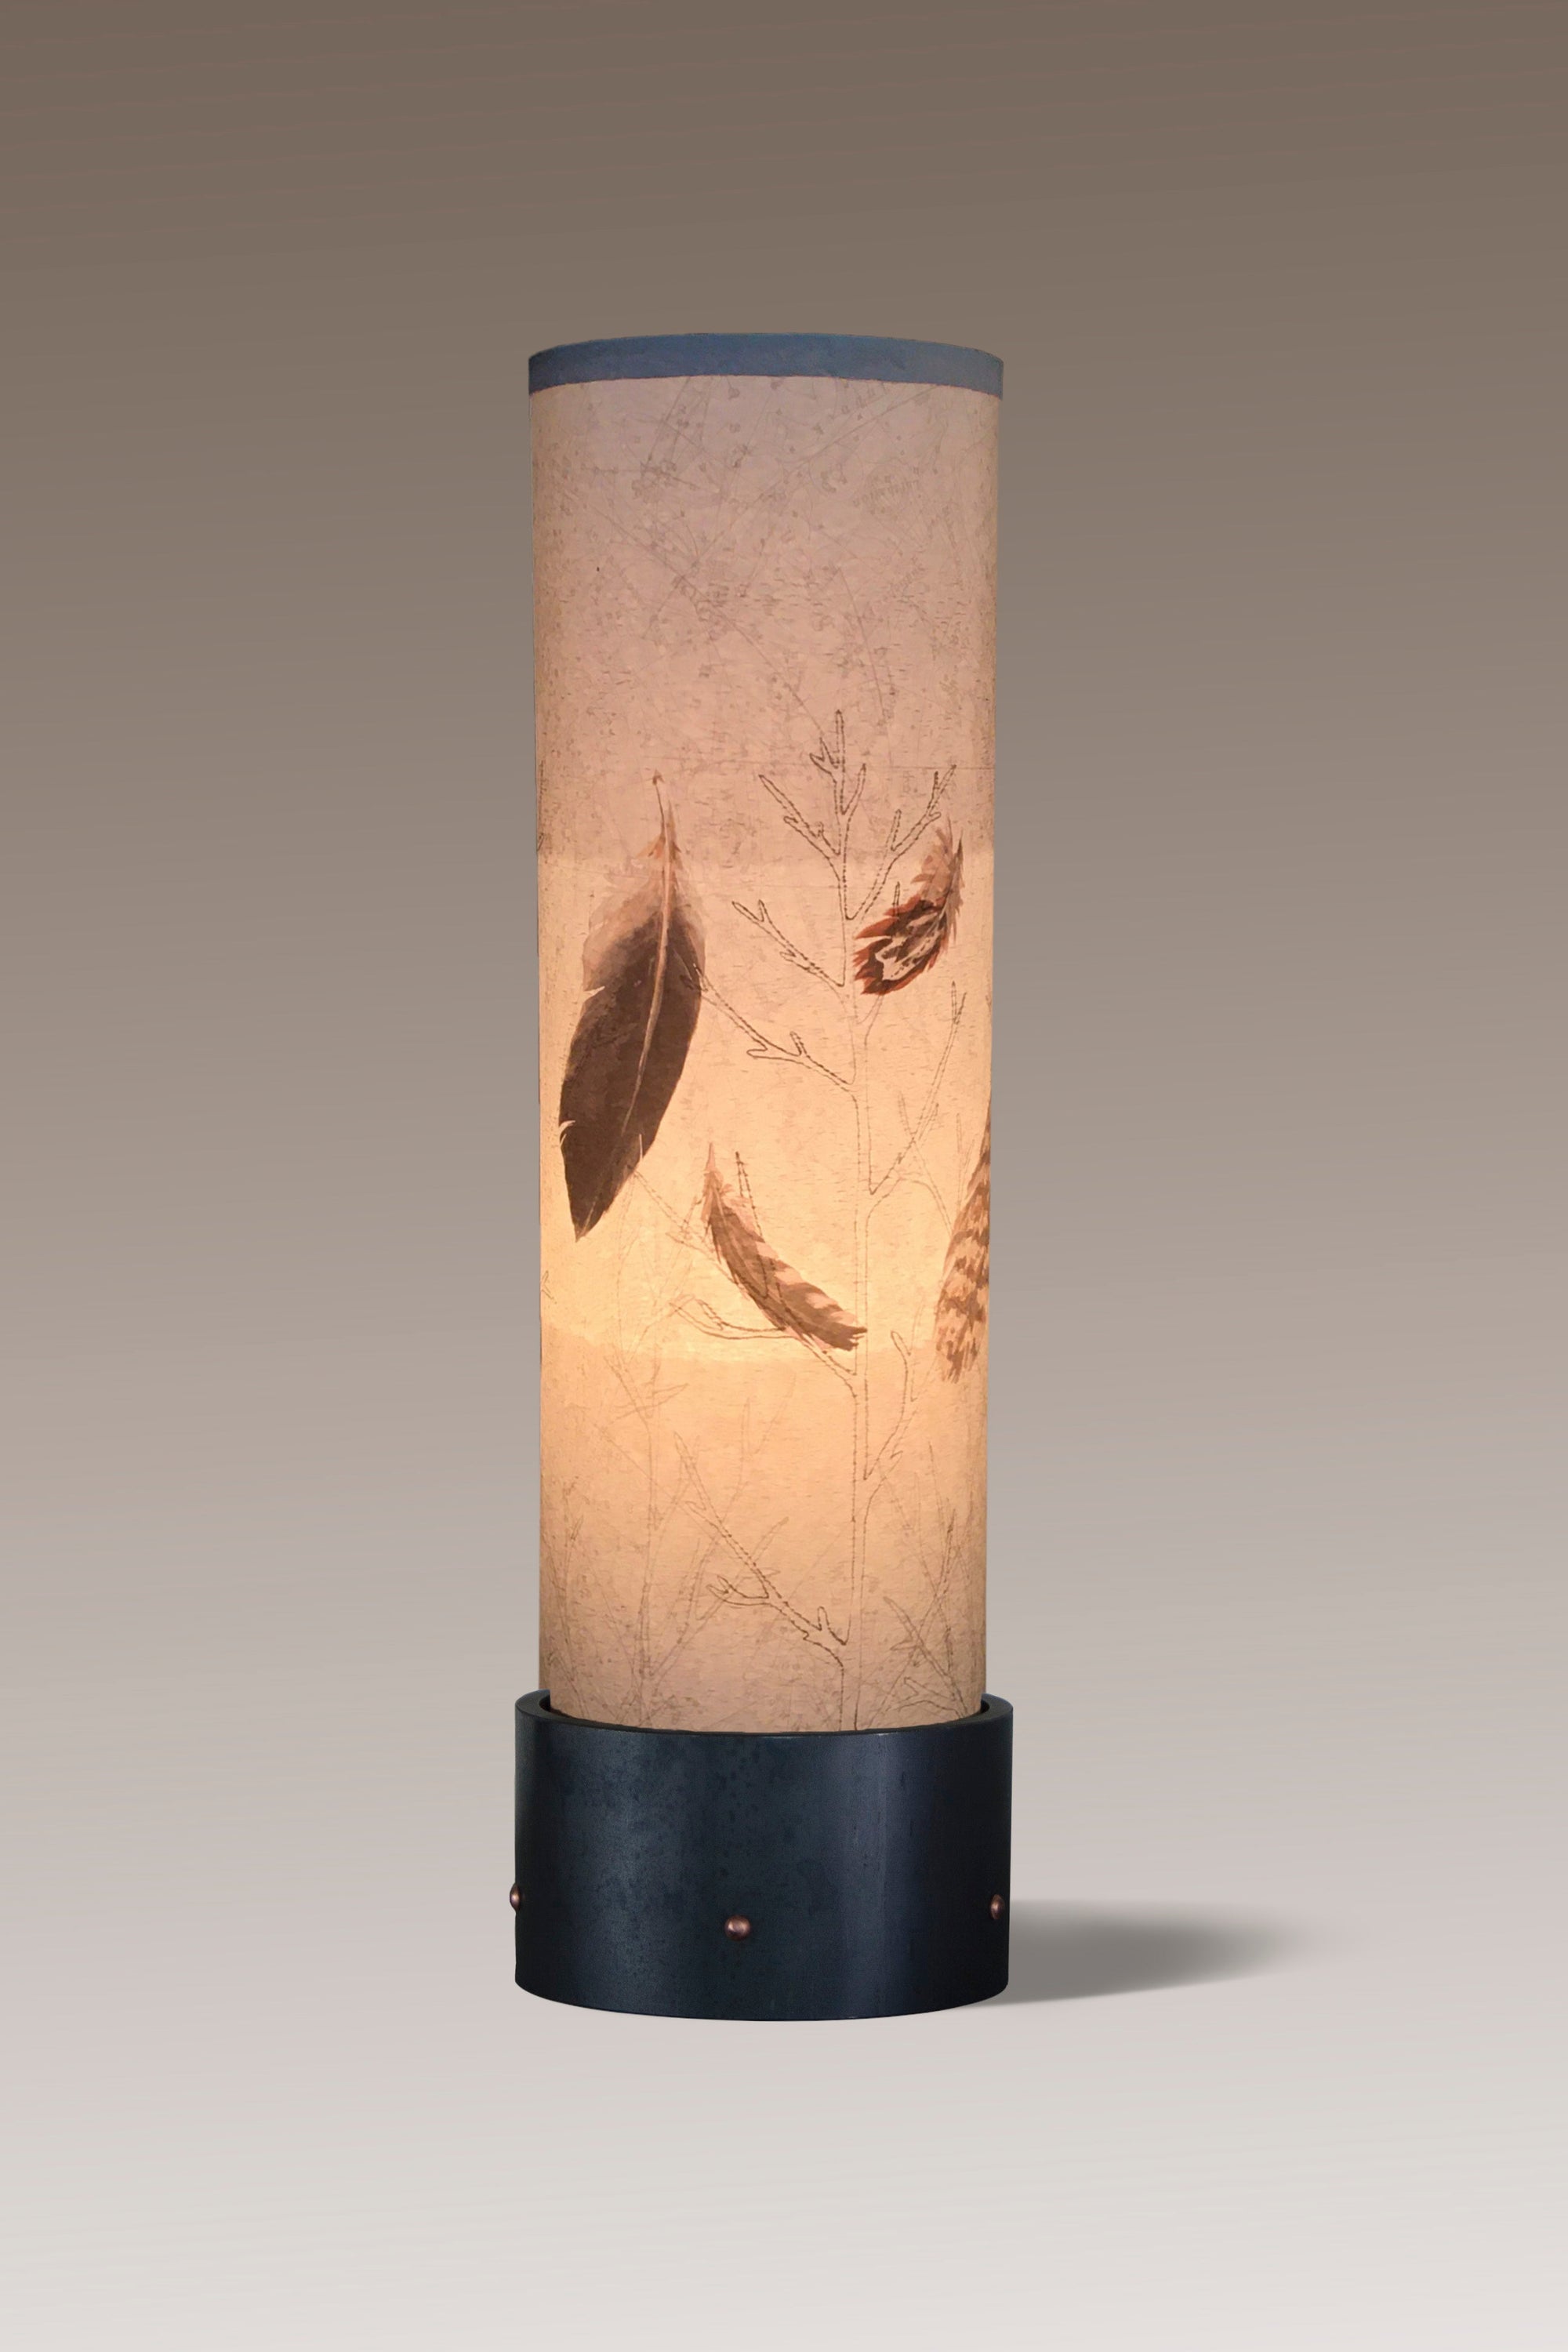 Janna Ugone & Co Luminaires Steel Luminaire Accent Lamp with Feathers in Pebble Shade